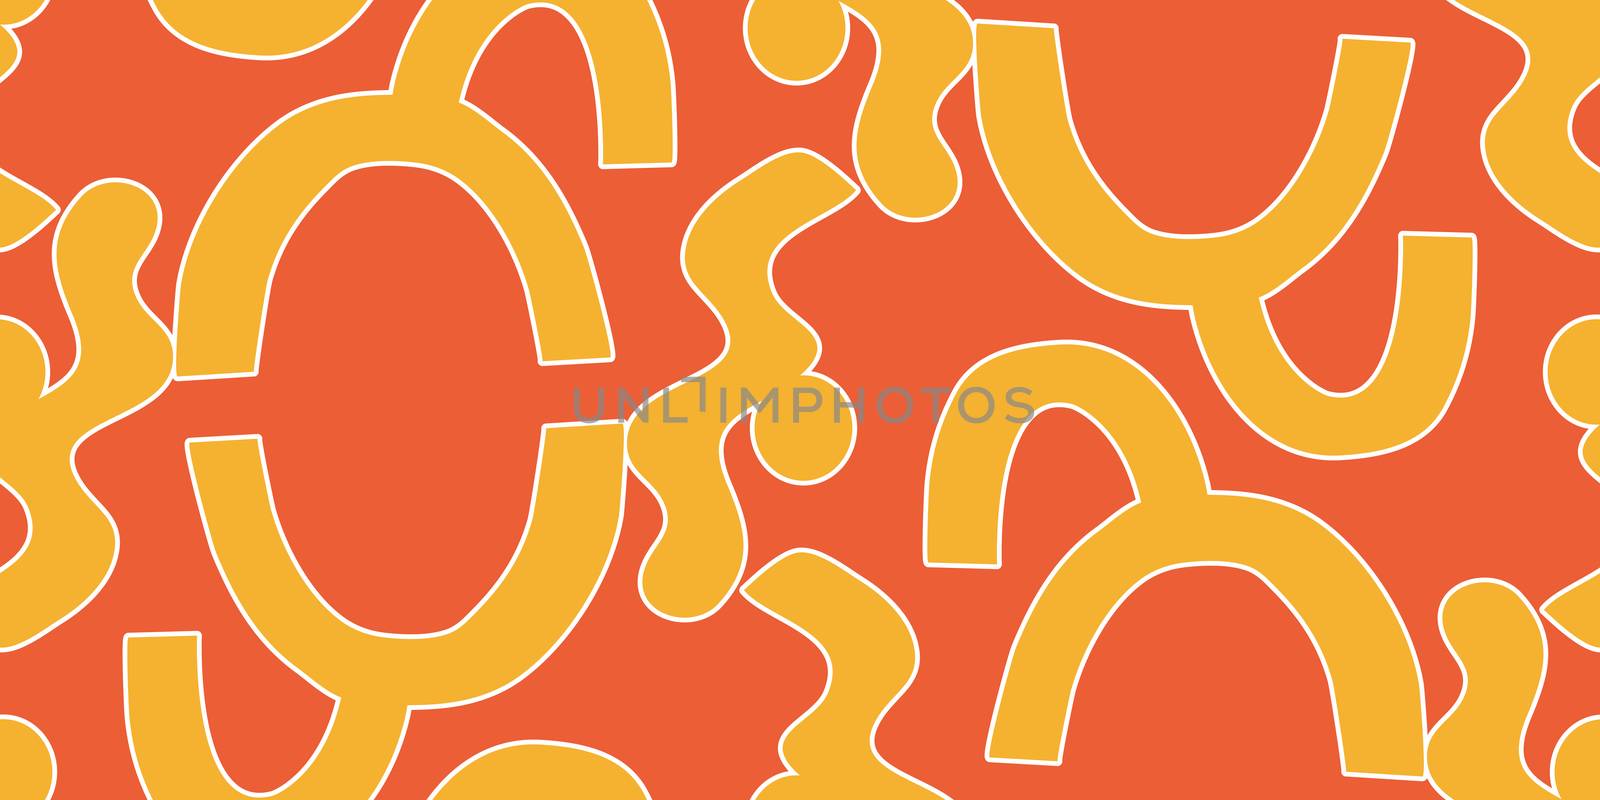 Abstract Pattern of Orange Shapes by TheBlackRhino